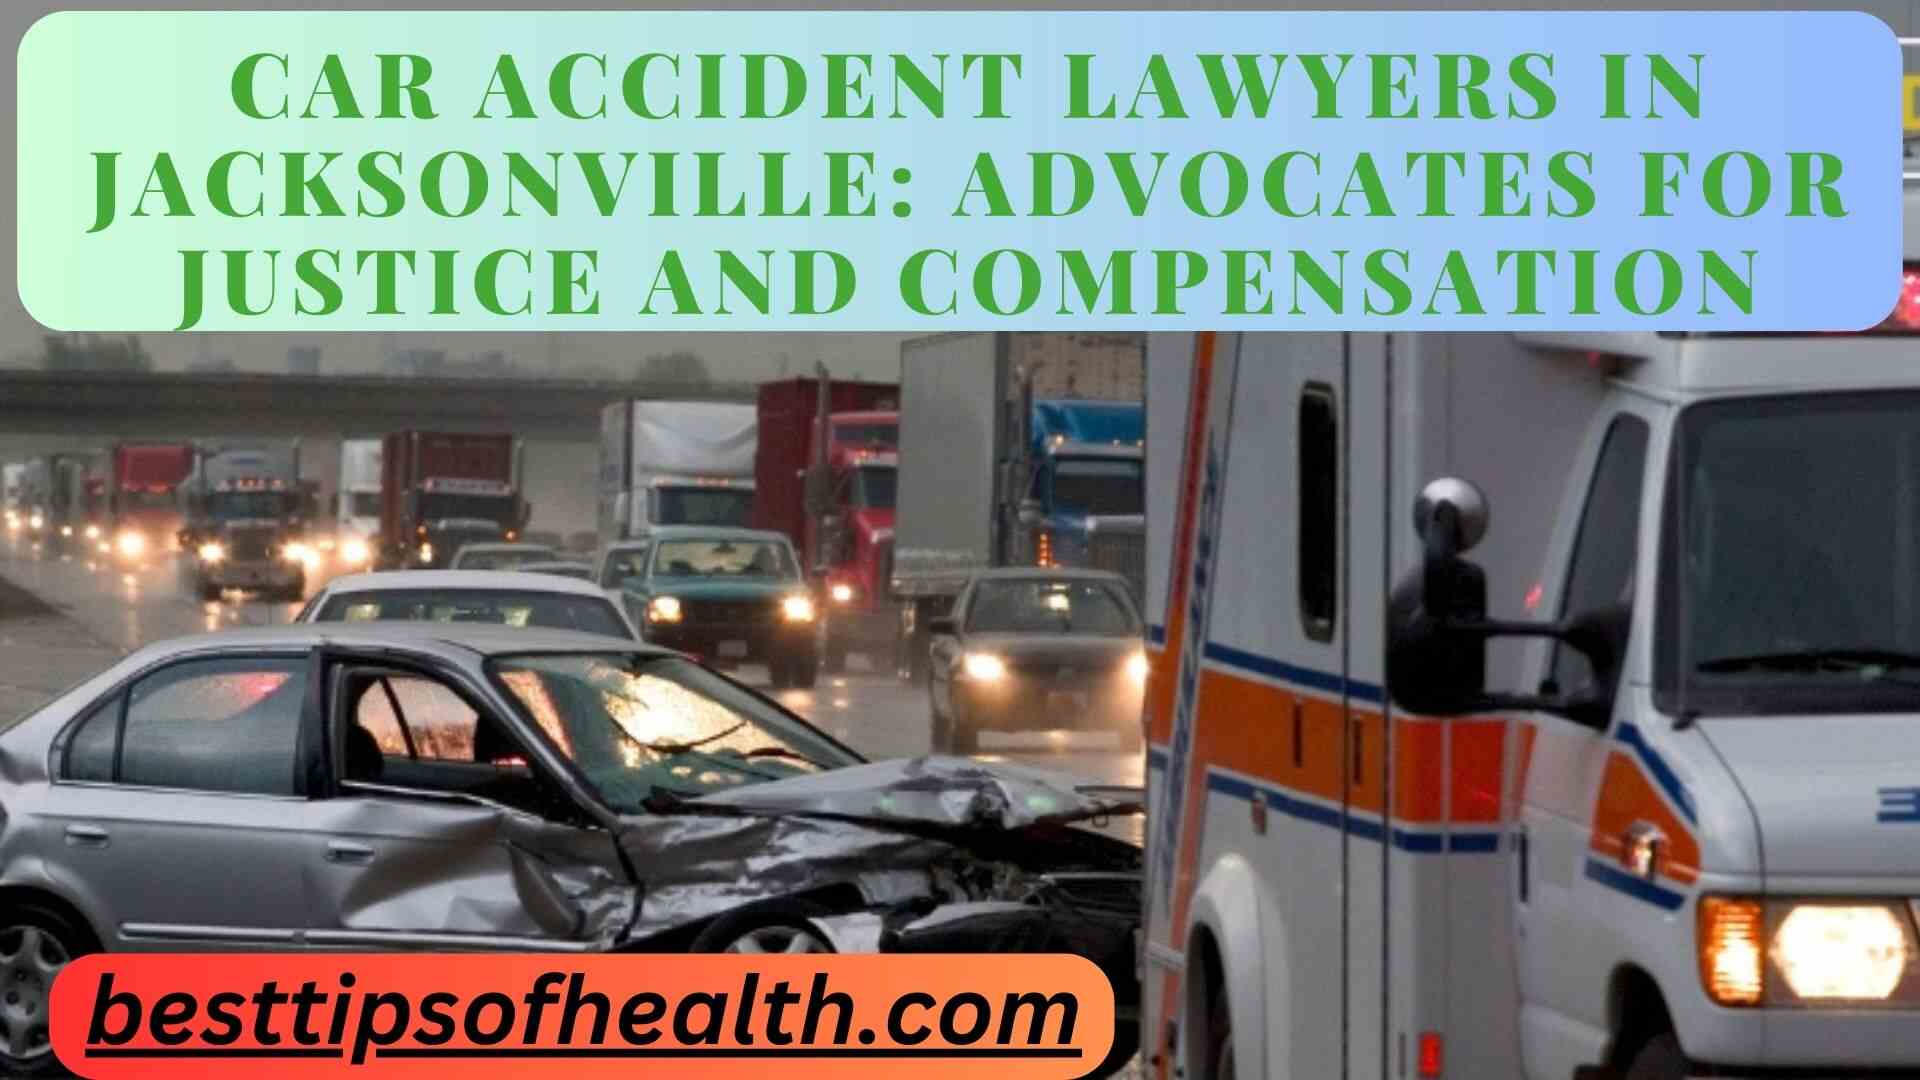 Car Accident Lawyers in Jacksonville: Advocates for Justice and Compensation